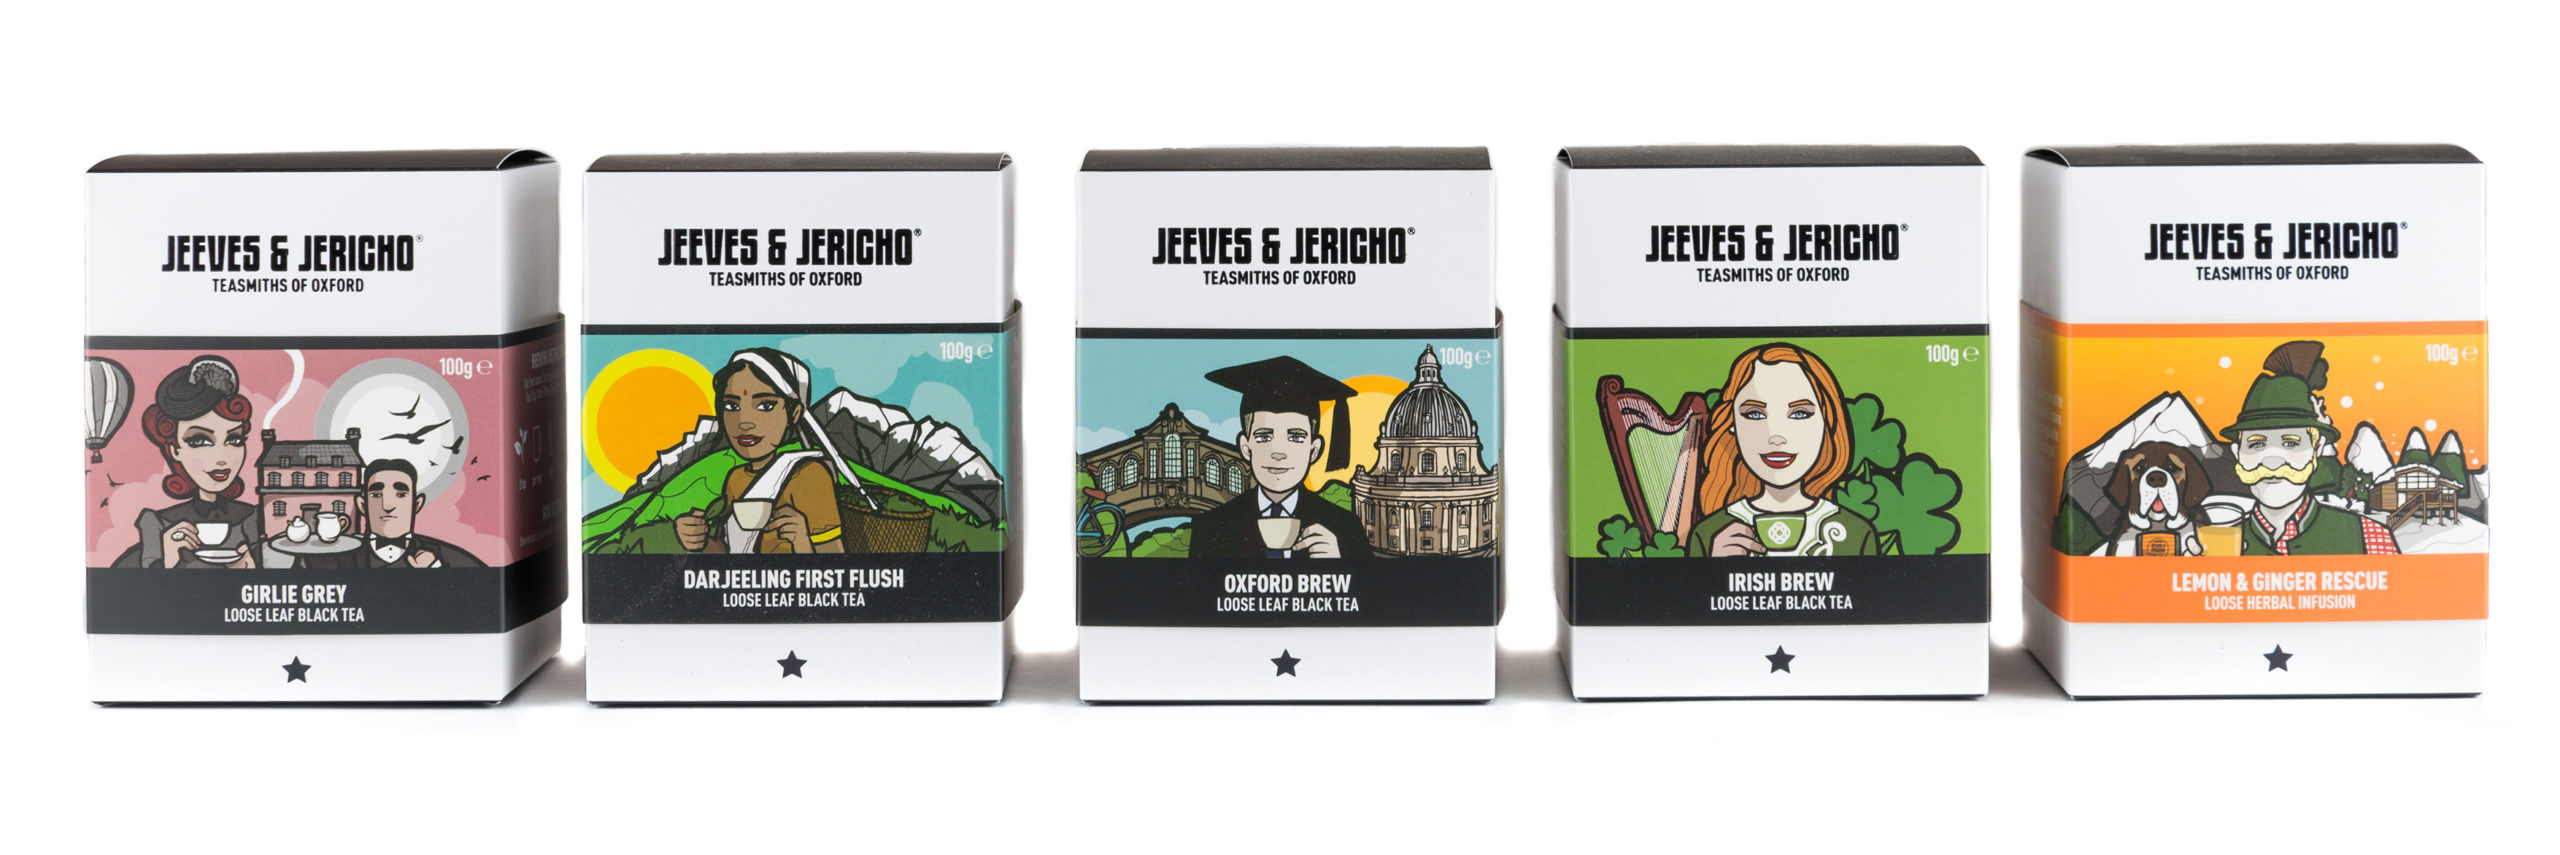 Jeeves and Jericho Tea branding and packaging